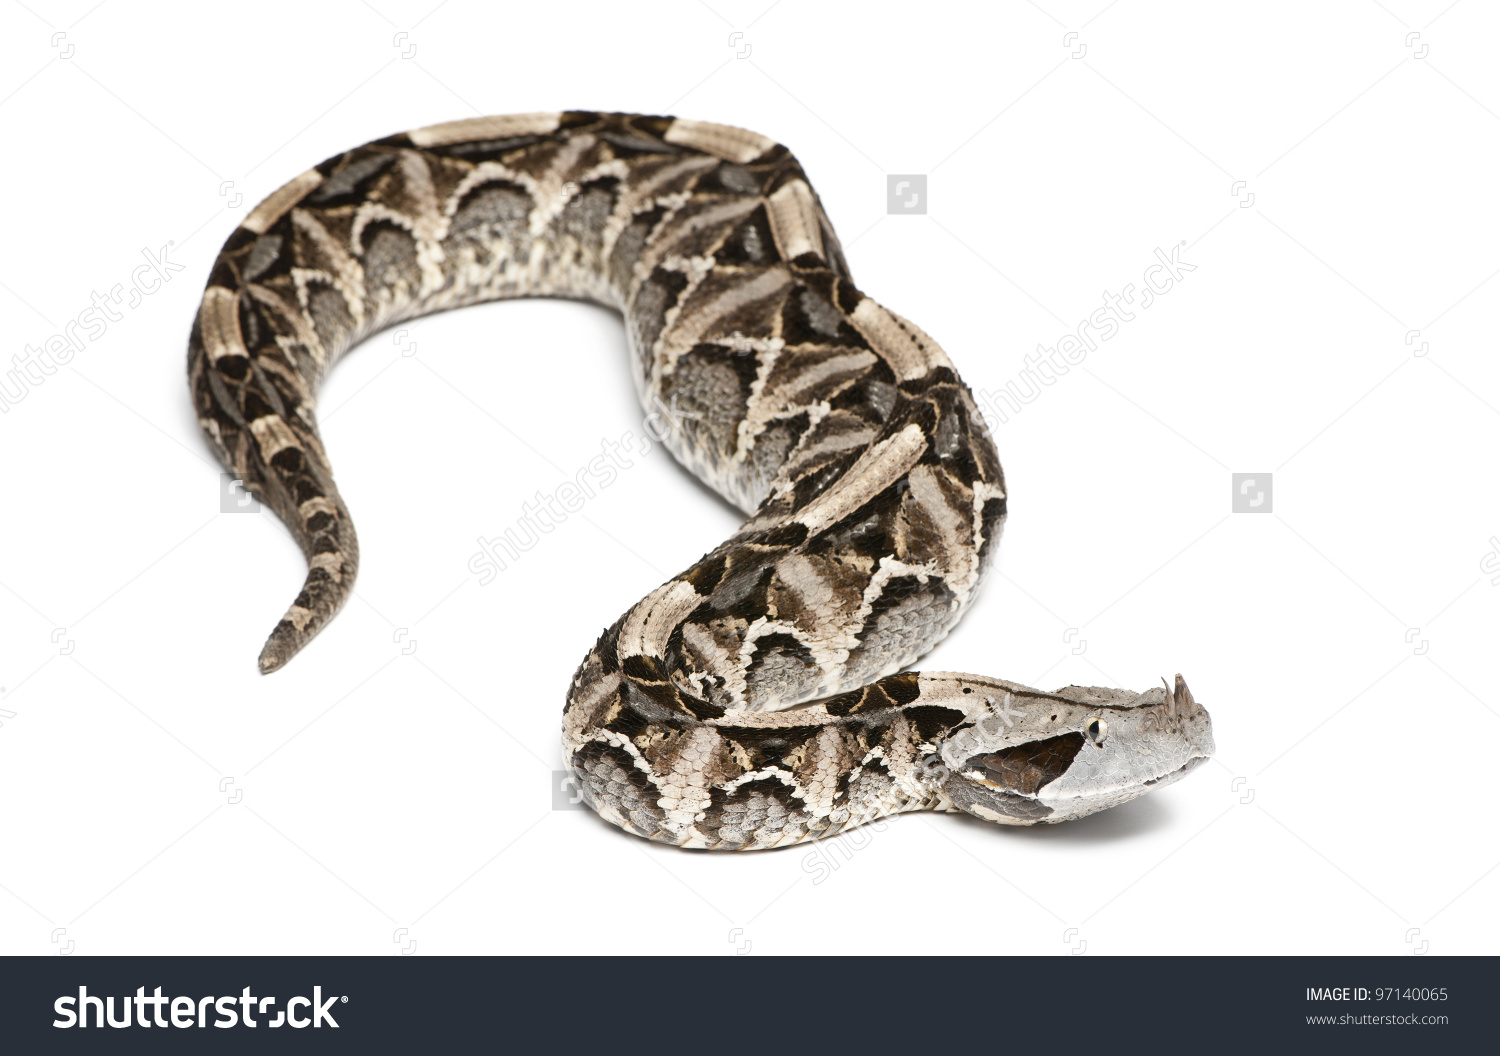 Gaboon Viper clipart #19, Download drawings